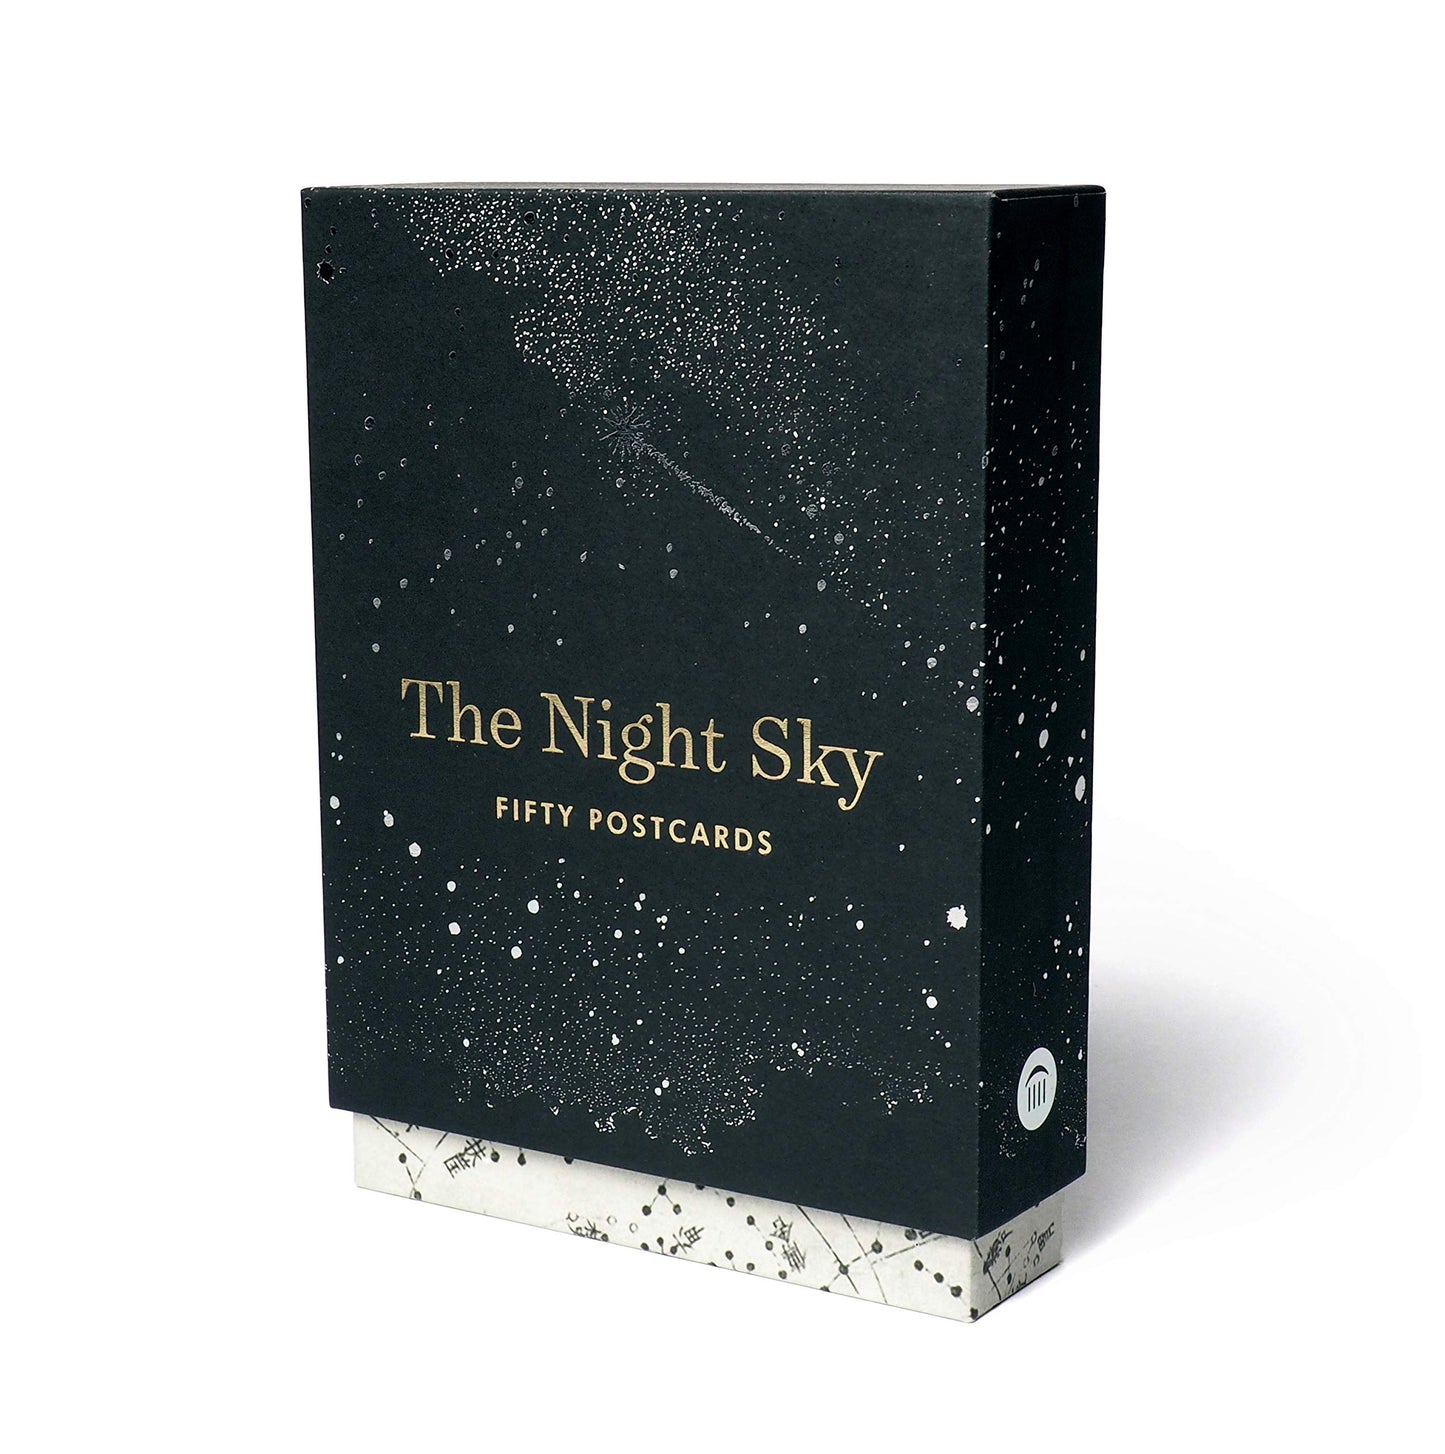 The Night Sky Fifty Postcards